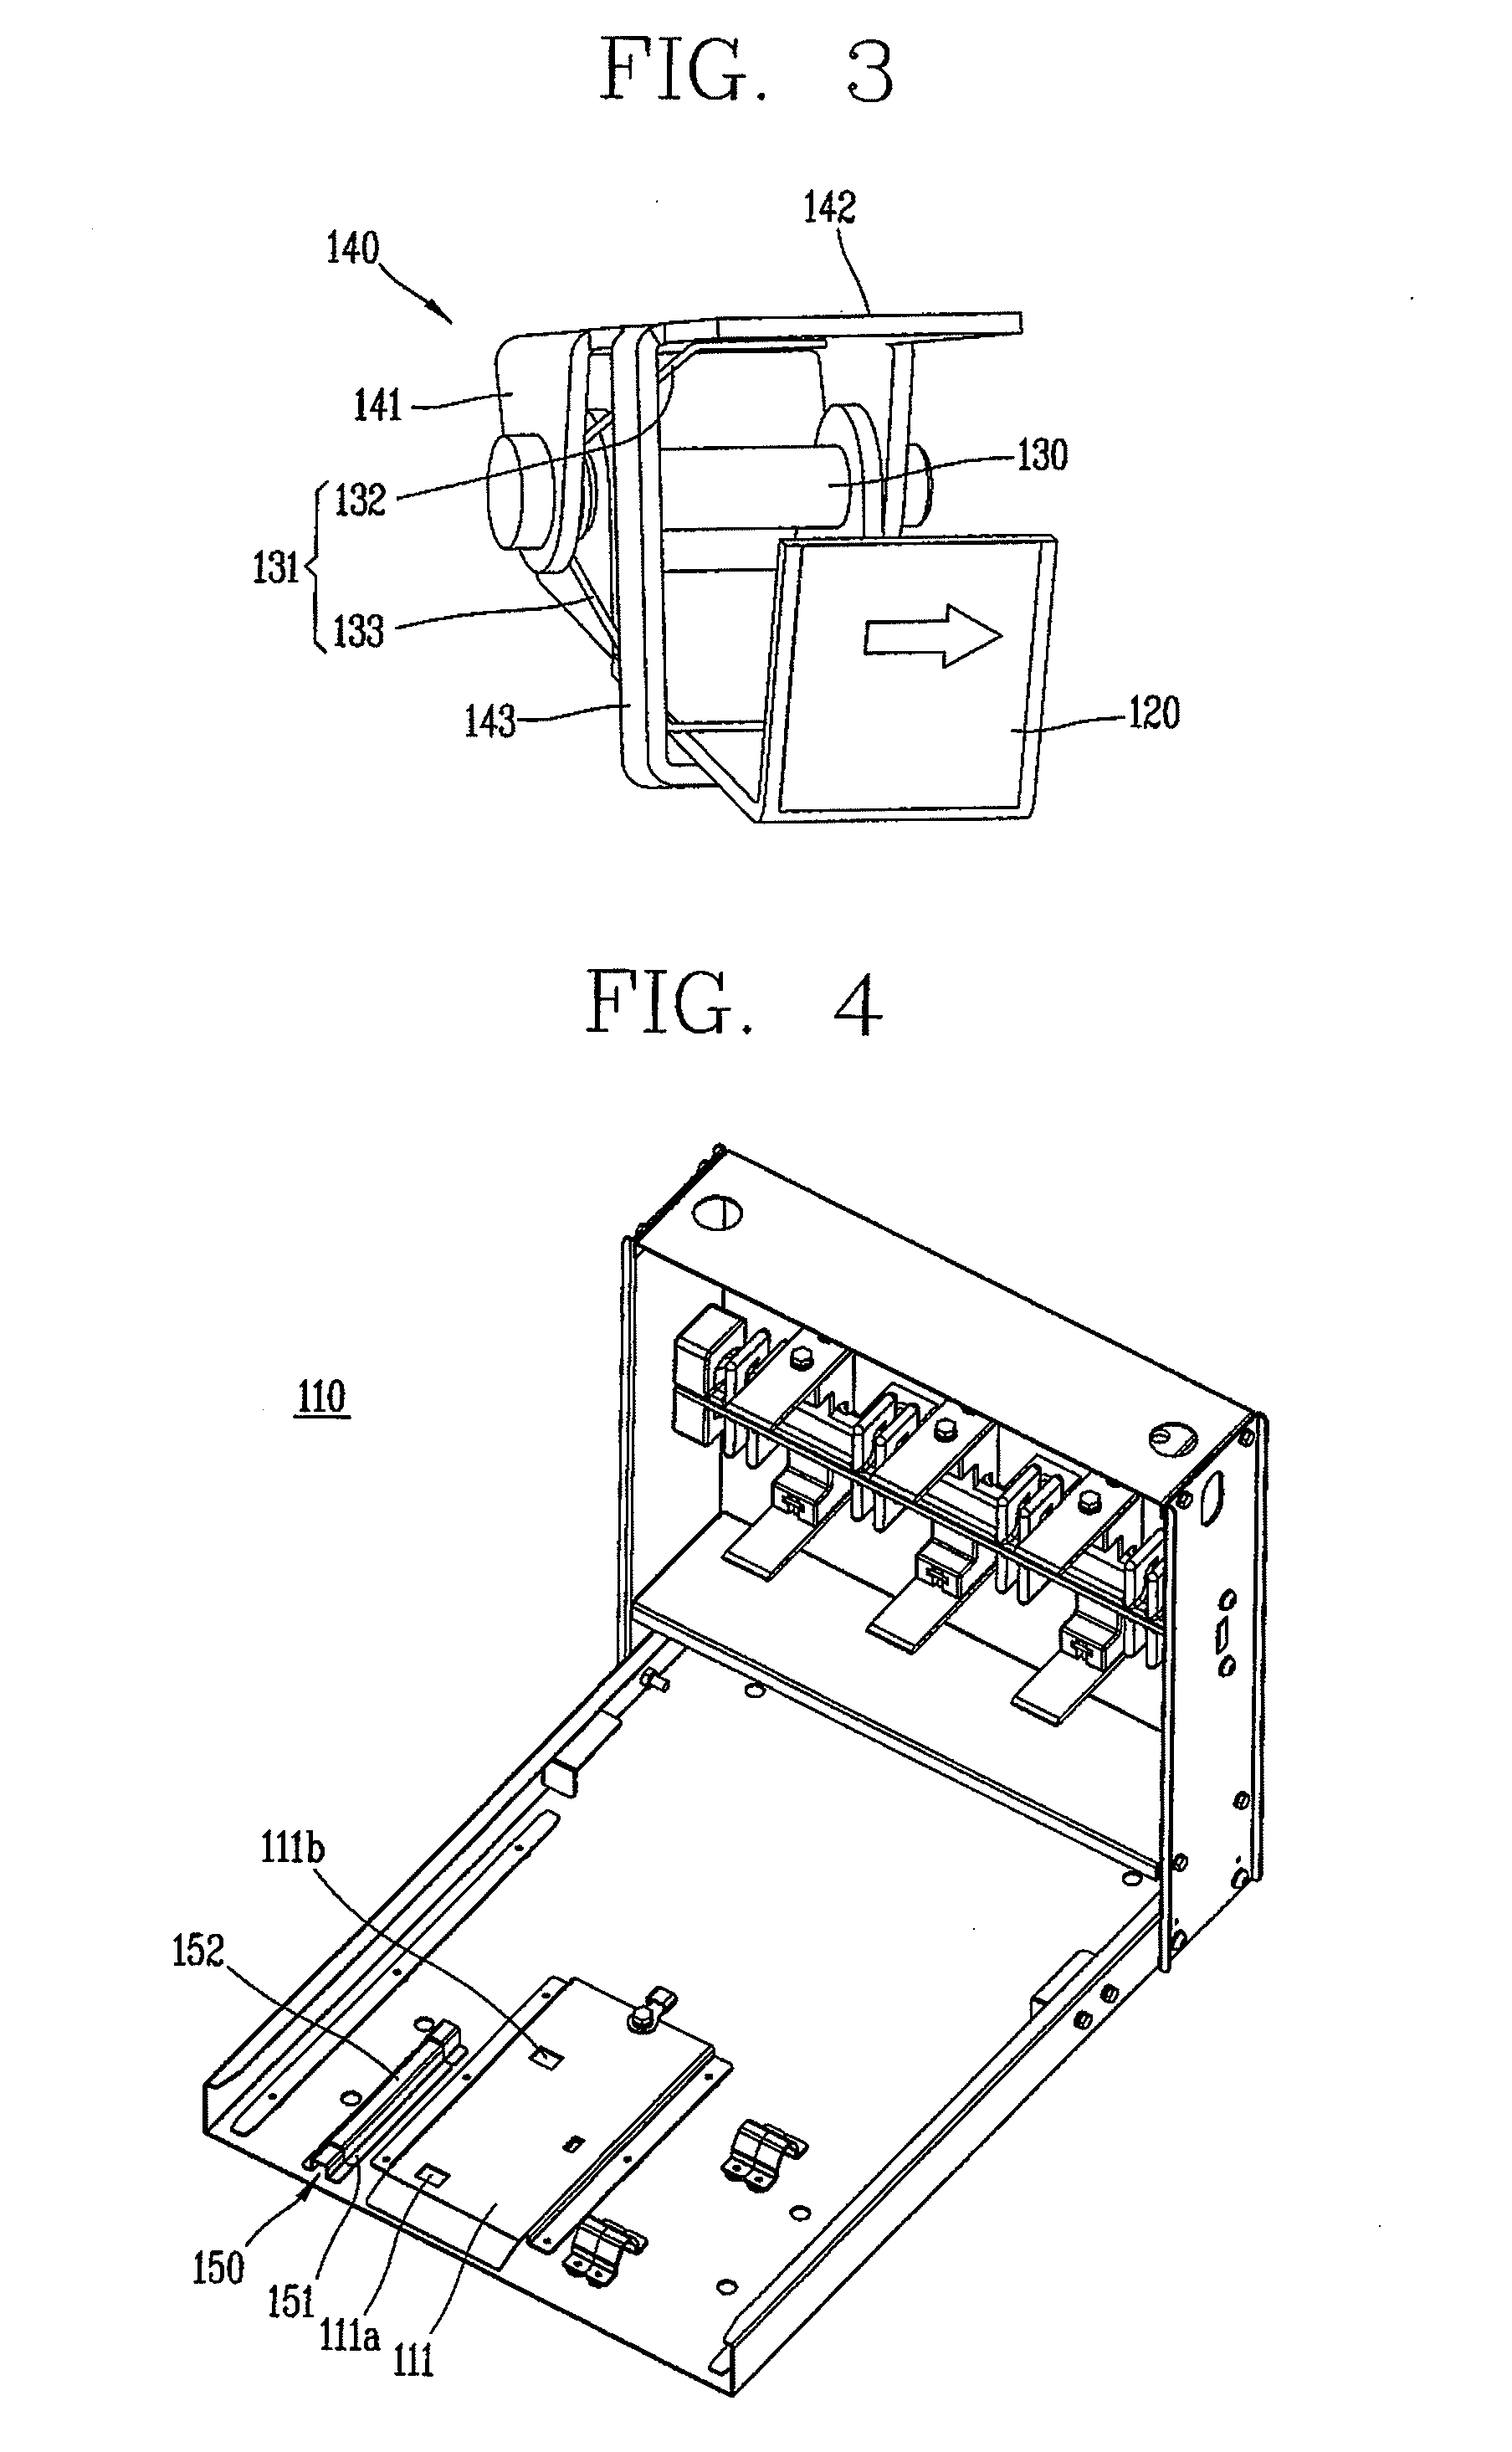 Position indicating device